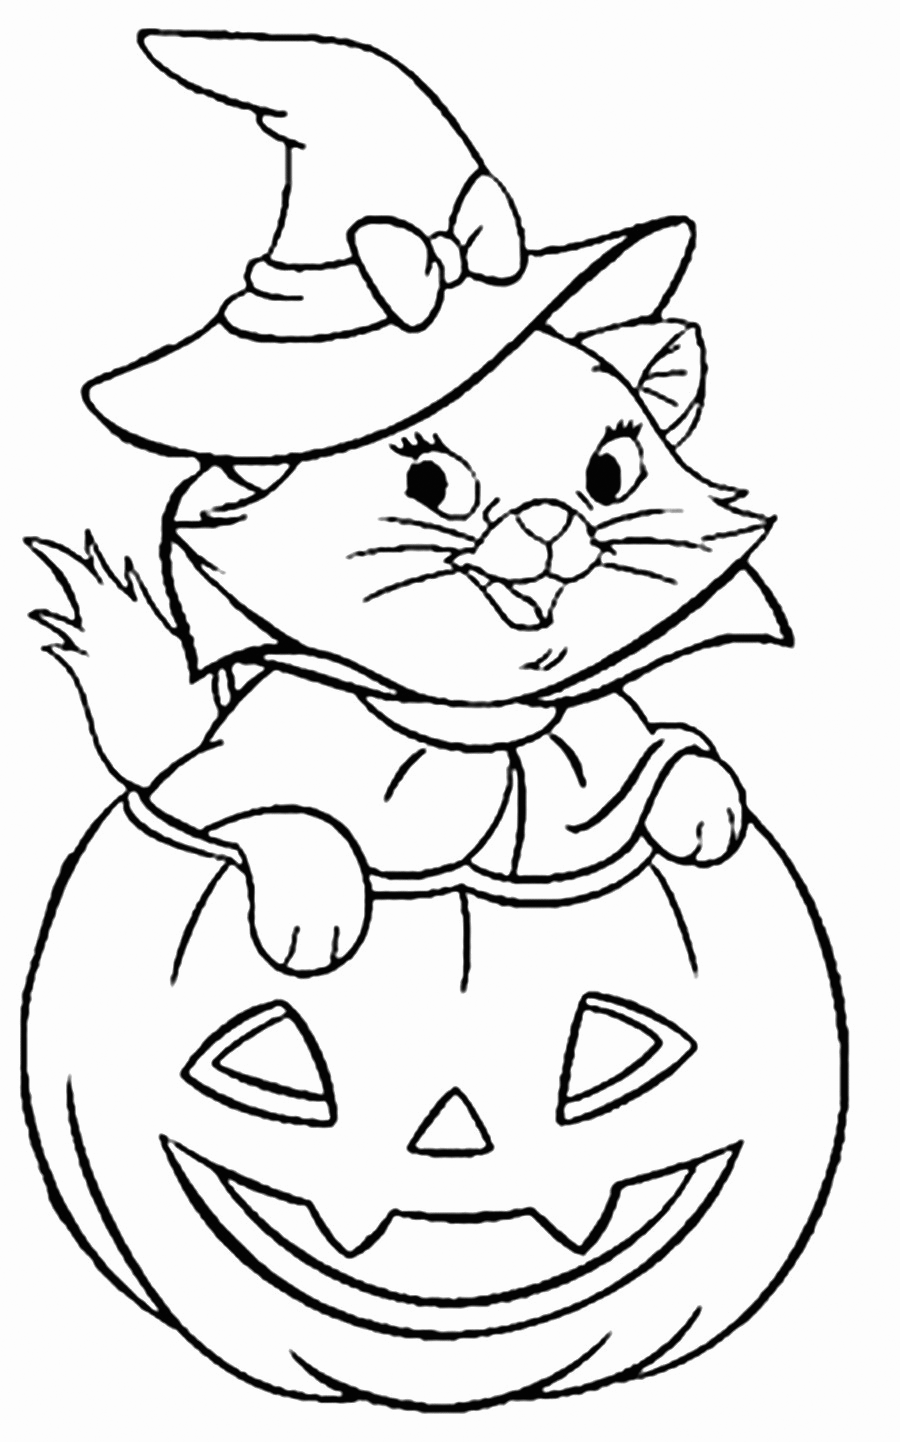 Halloween Cat Coloring Pages   Best Coloring Pages For Kids